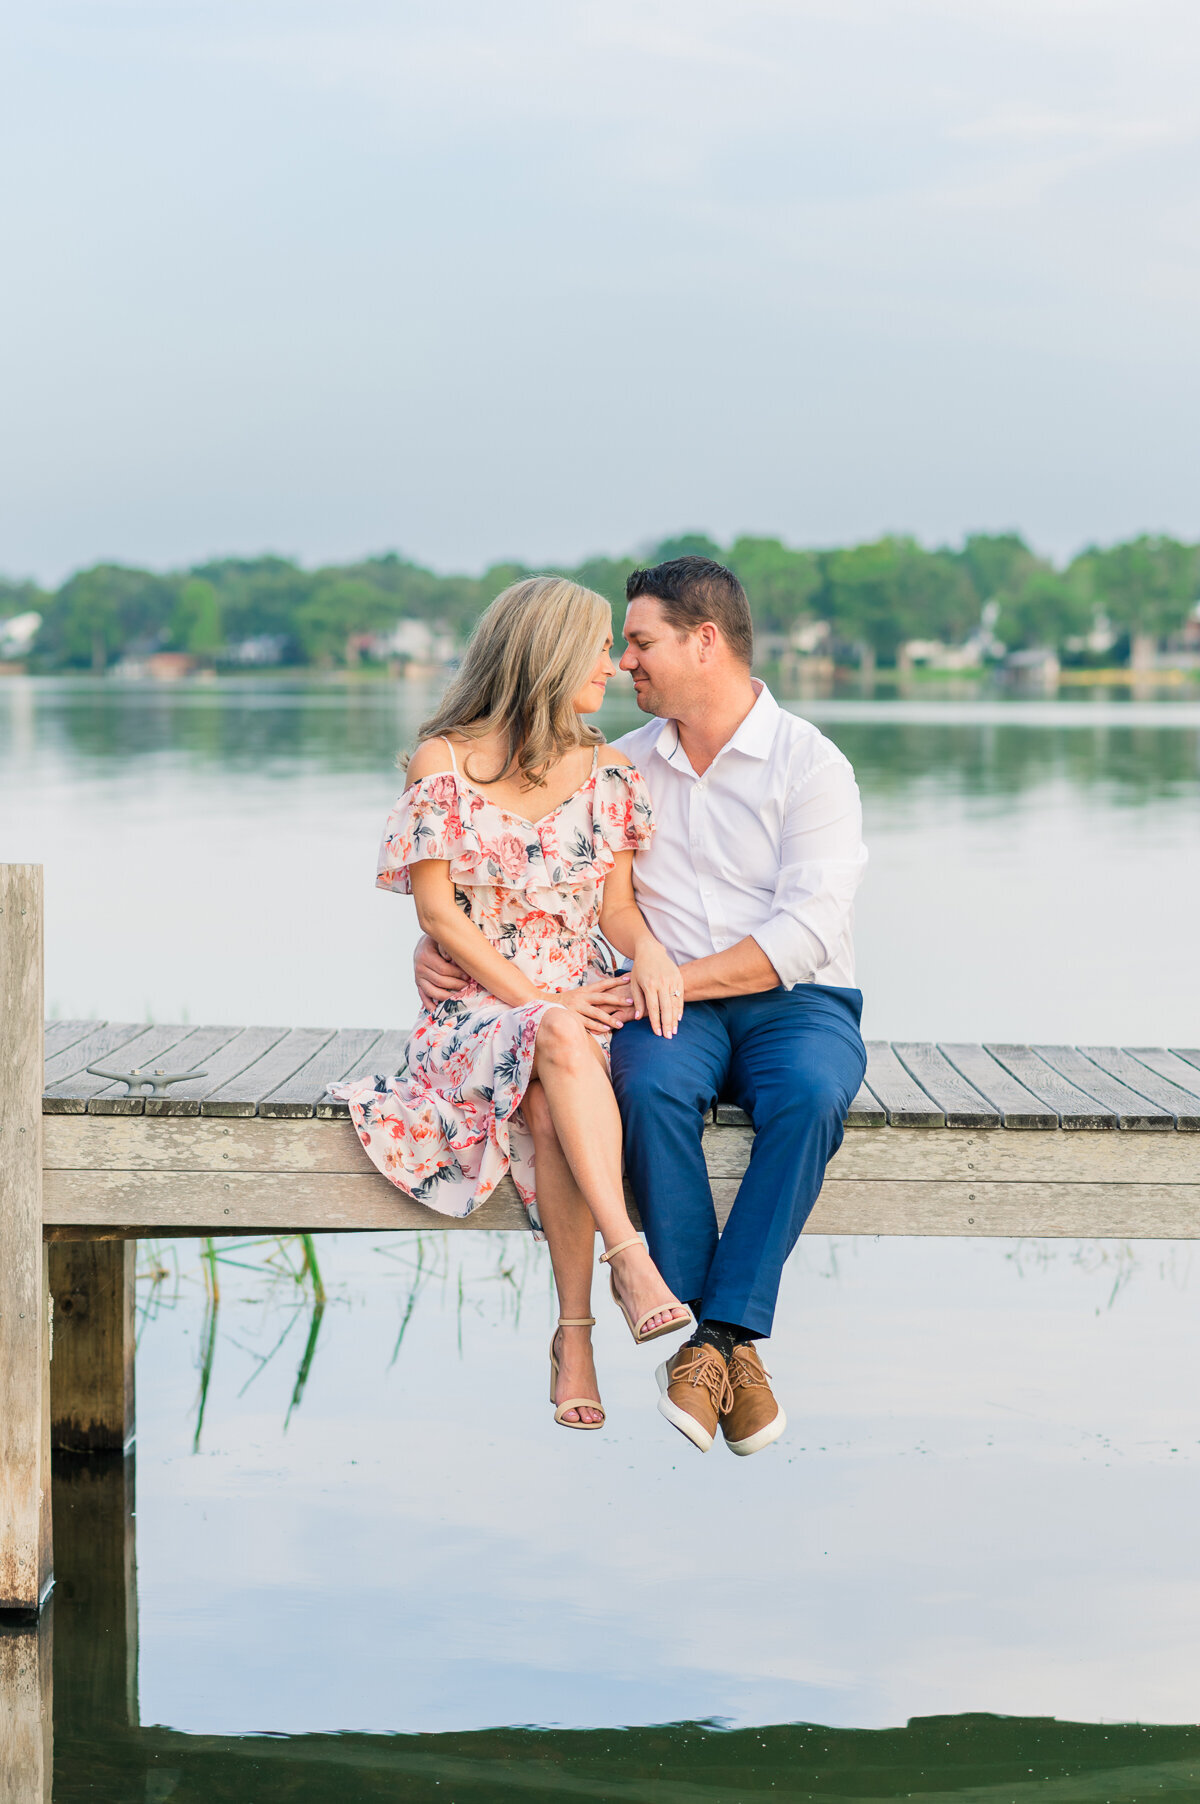 Nicky & Donny | Rollins College Engagement | Lisa Marshall Photography-15